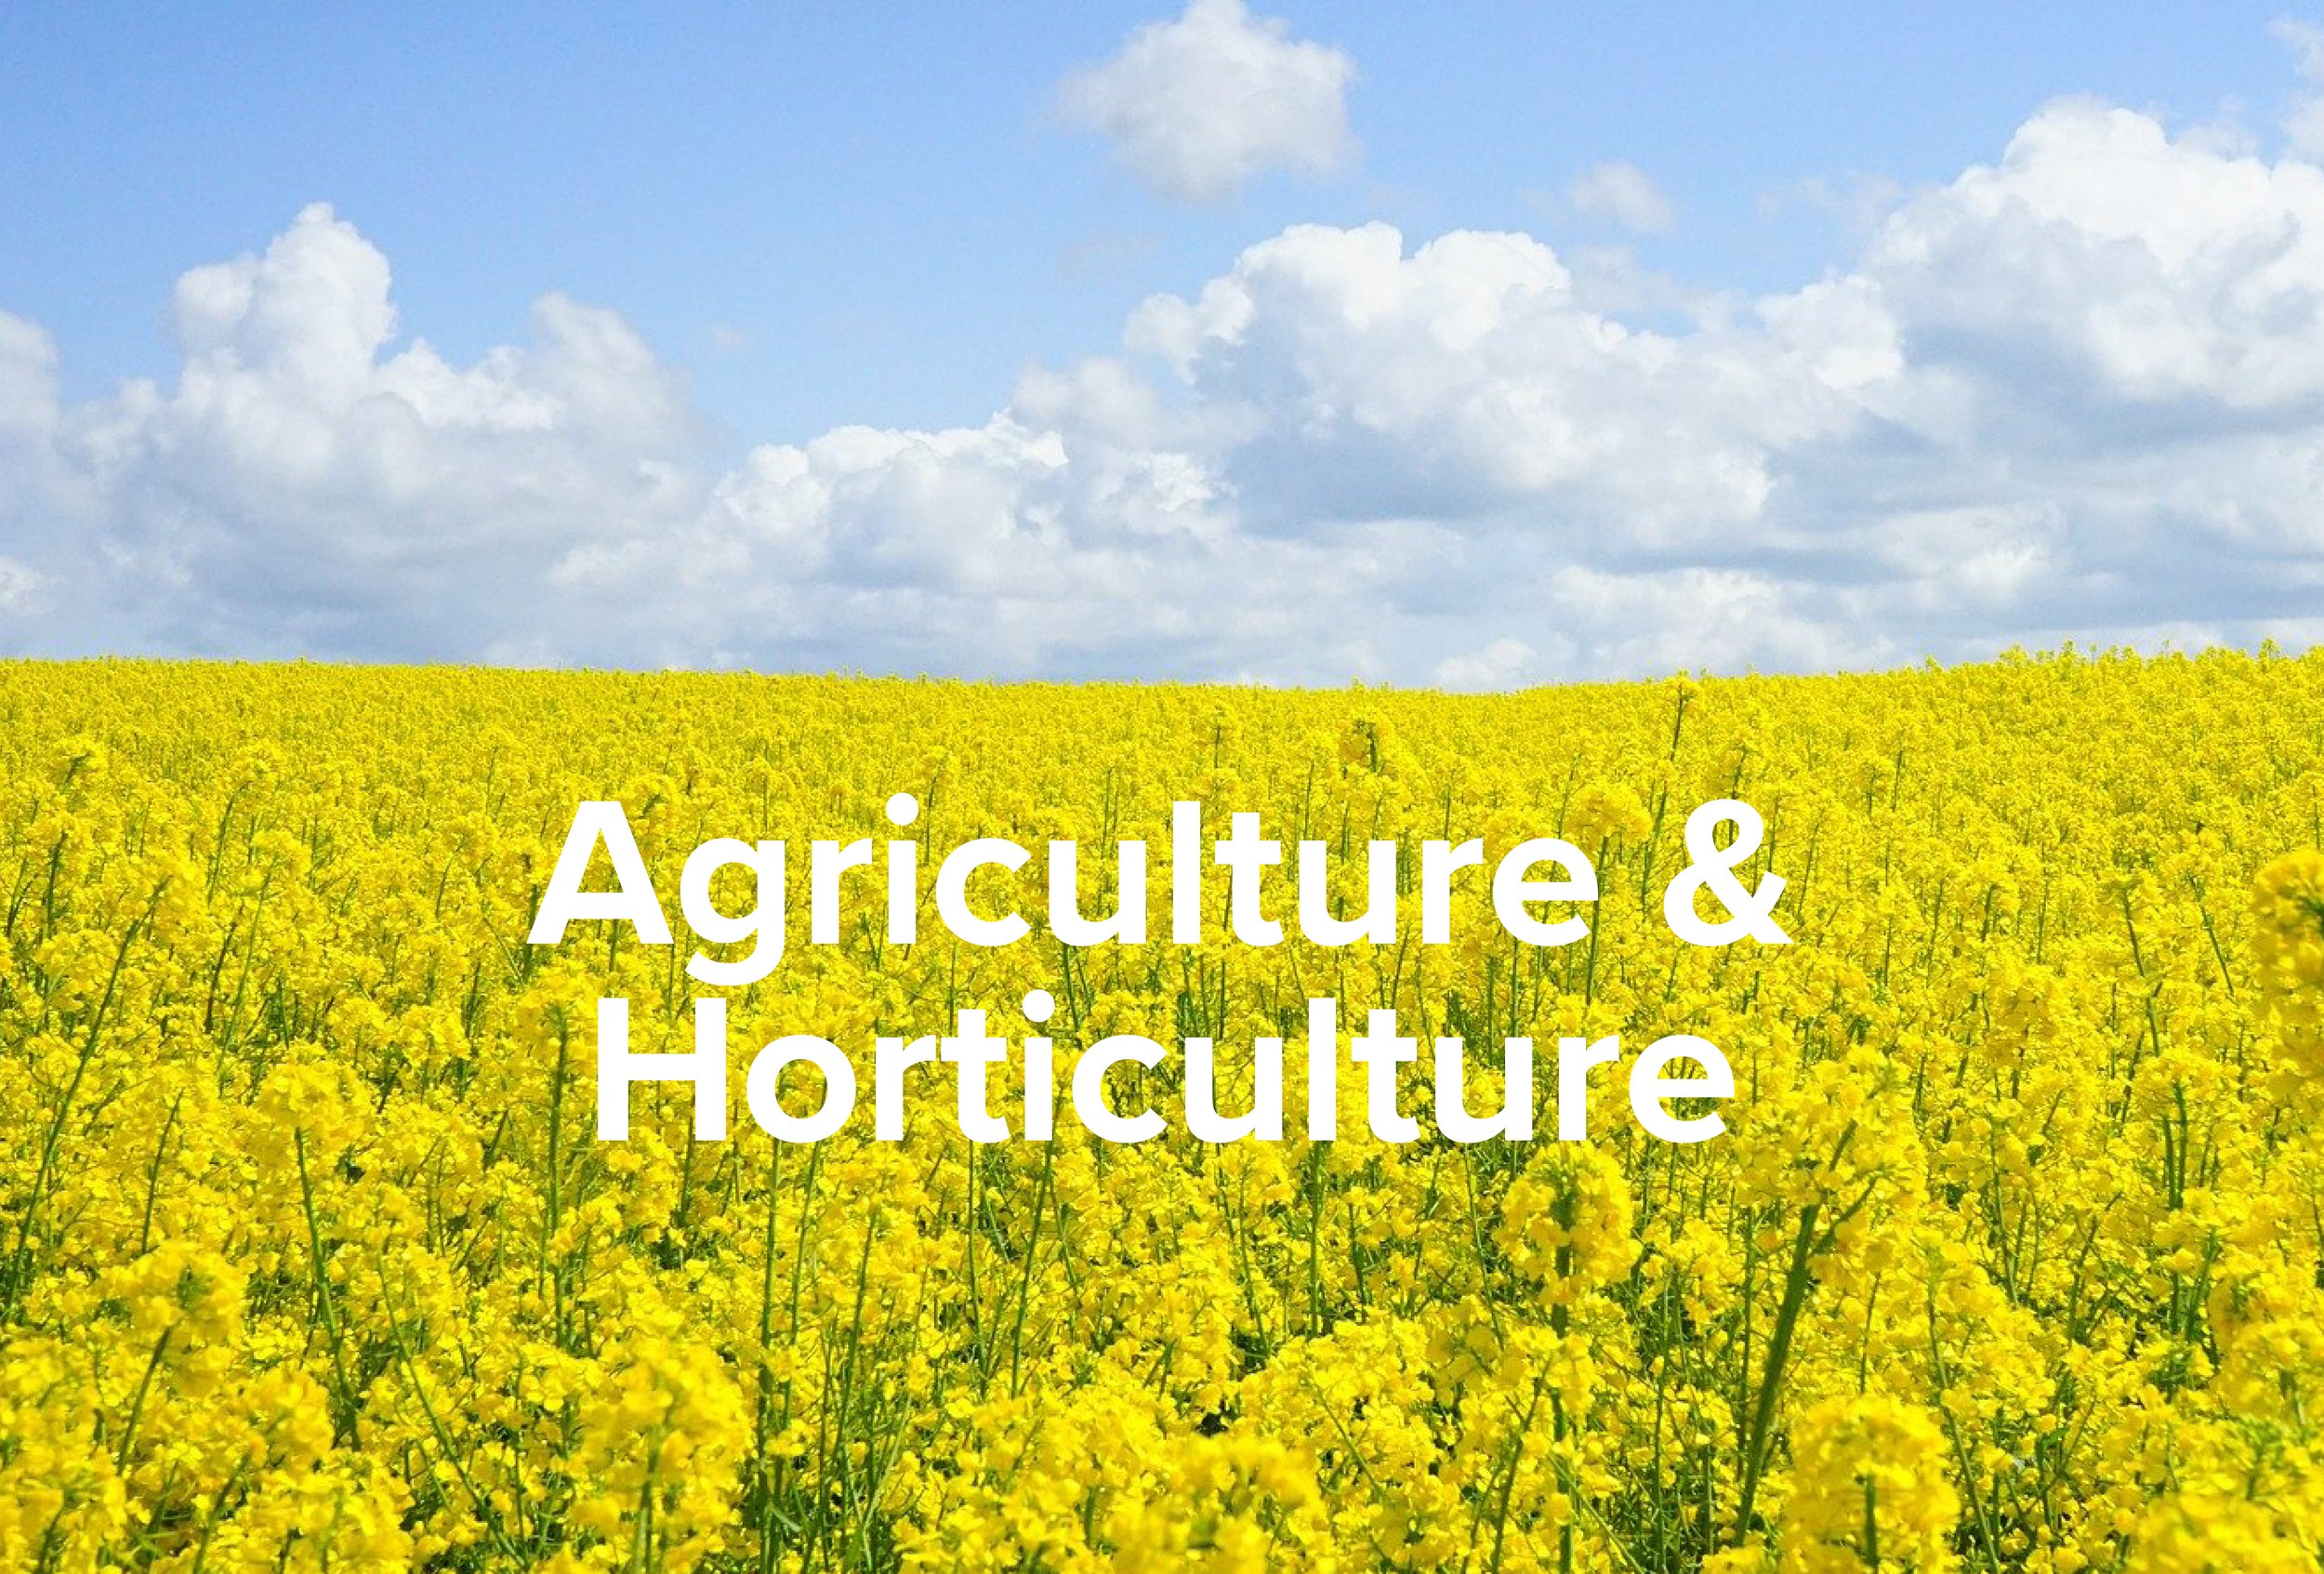 Agriculture & Horticulture new.jpg